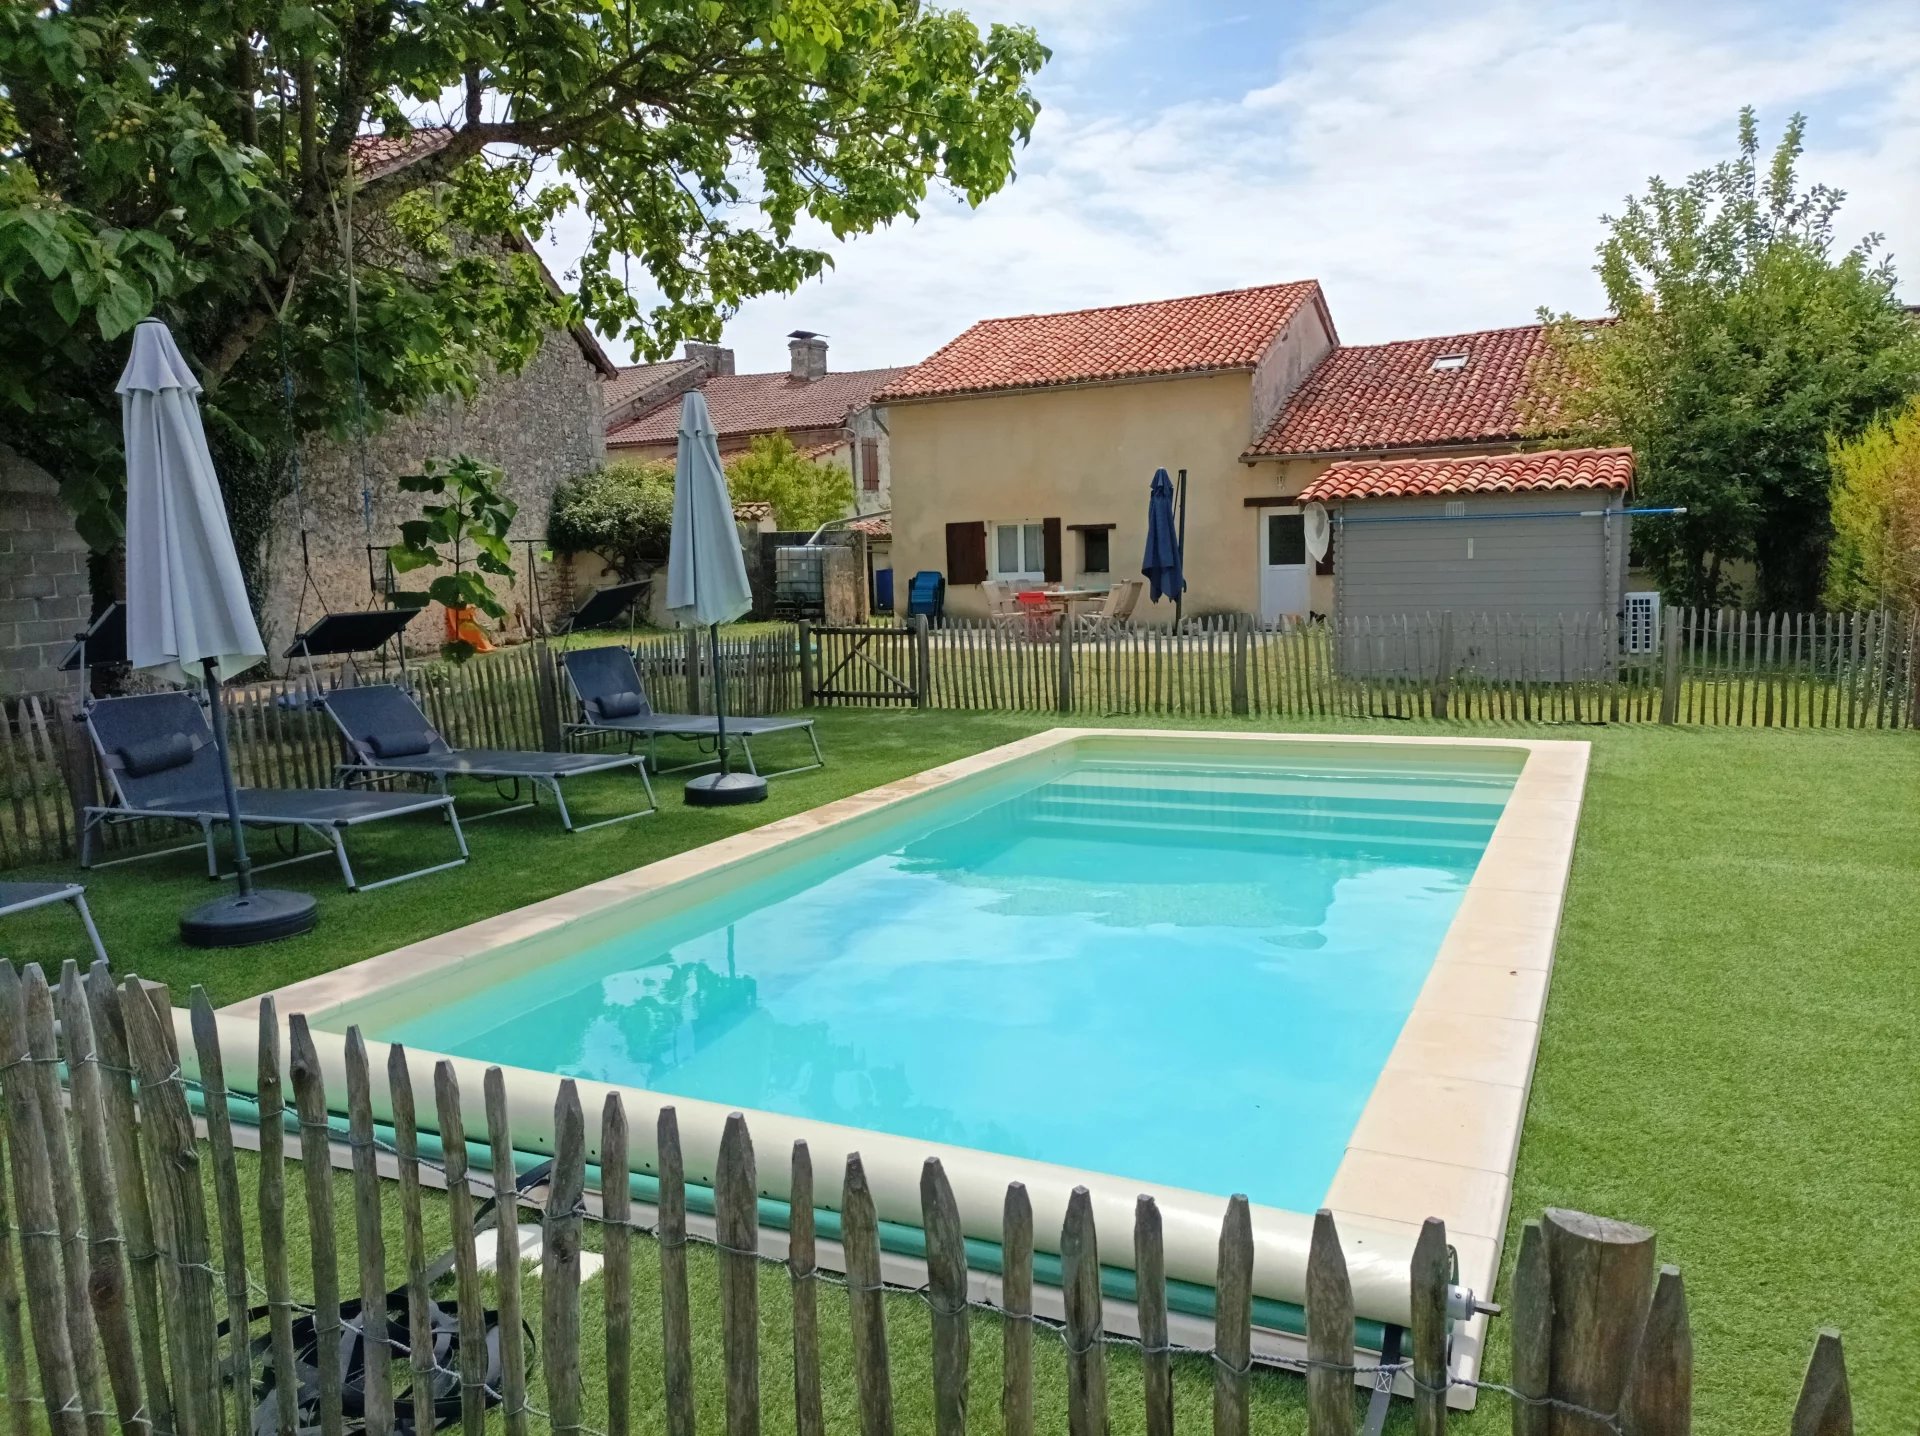 Lovely village house with 4 beds, 2 baths and swimming pool